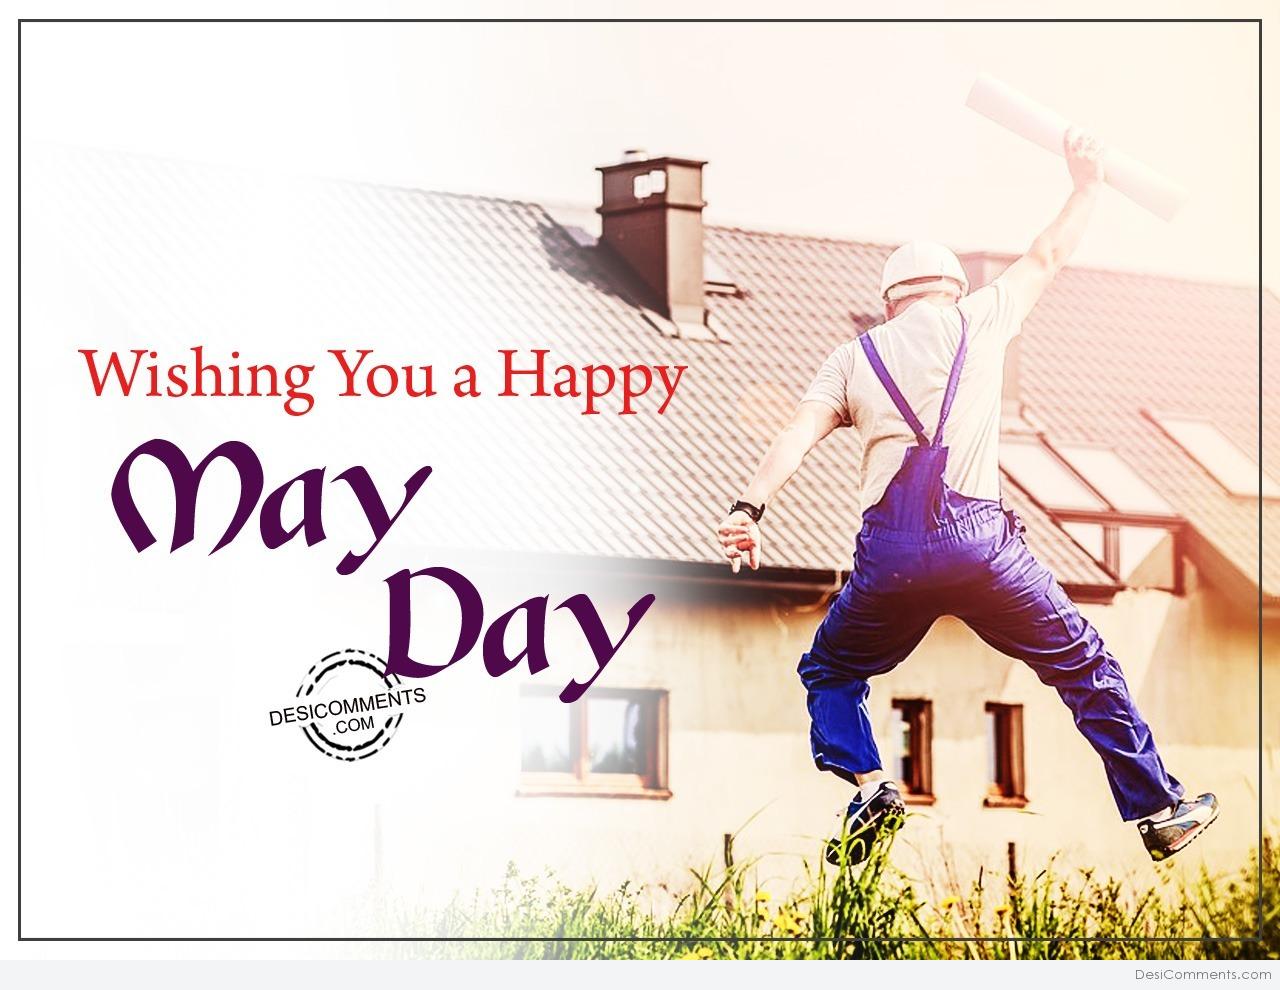 Wishing you a very happy May Day - DesiComments.com